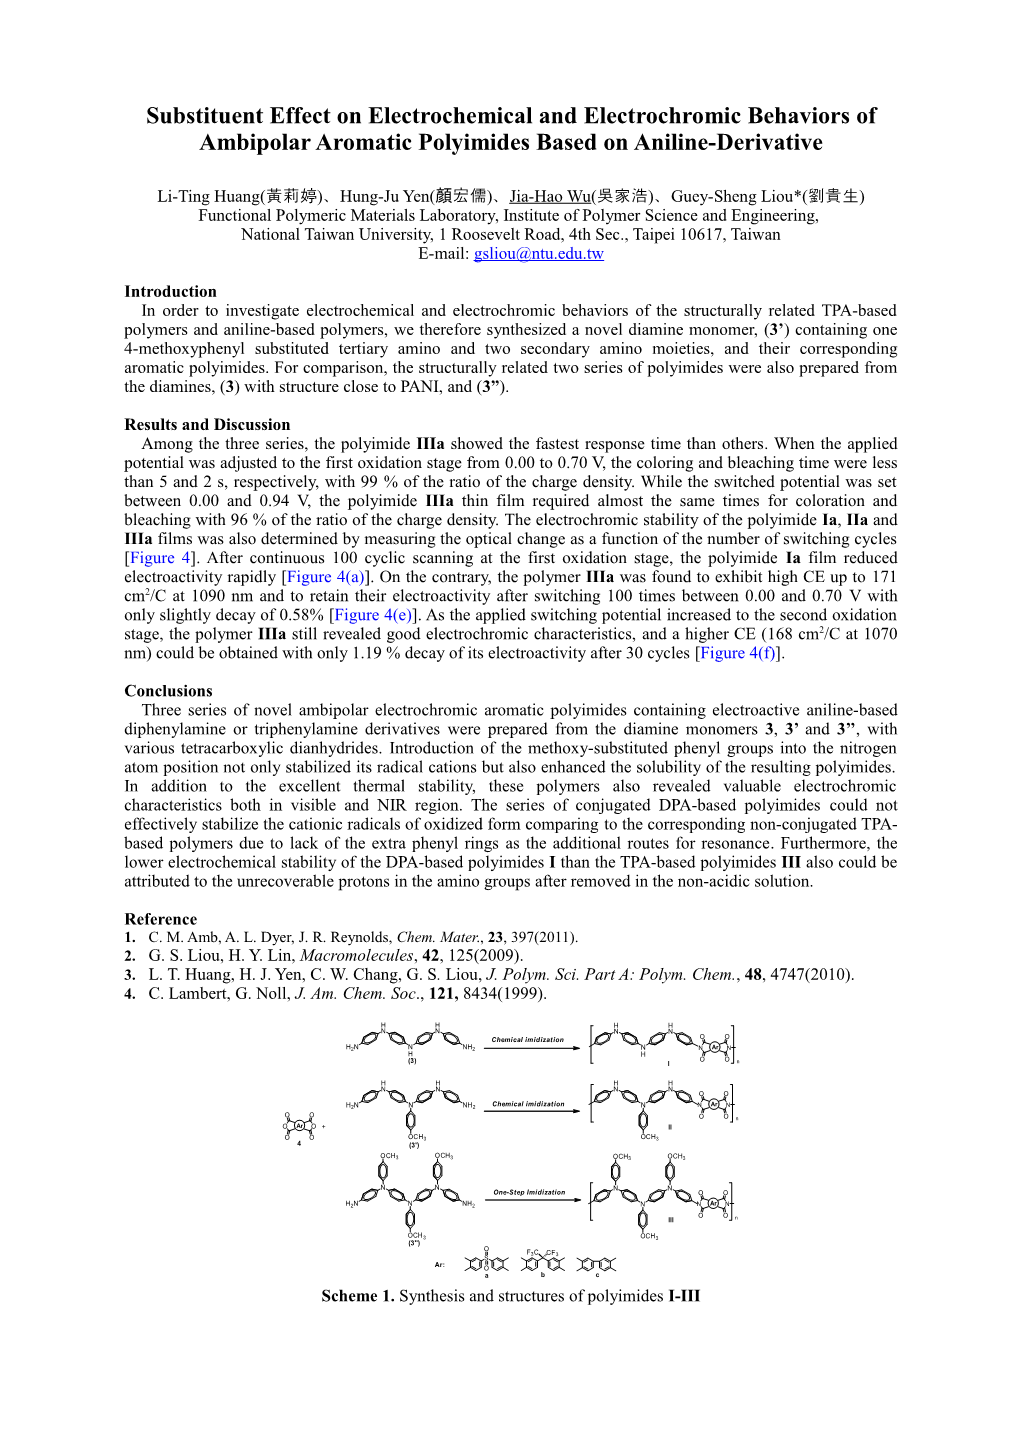 Substituent Effect on Electrochemical and Electrochromic Behaviors of Ambipolar Aromatic